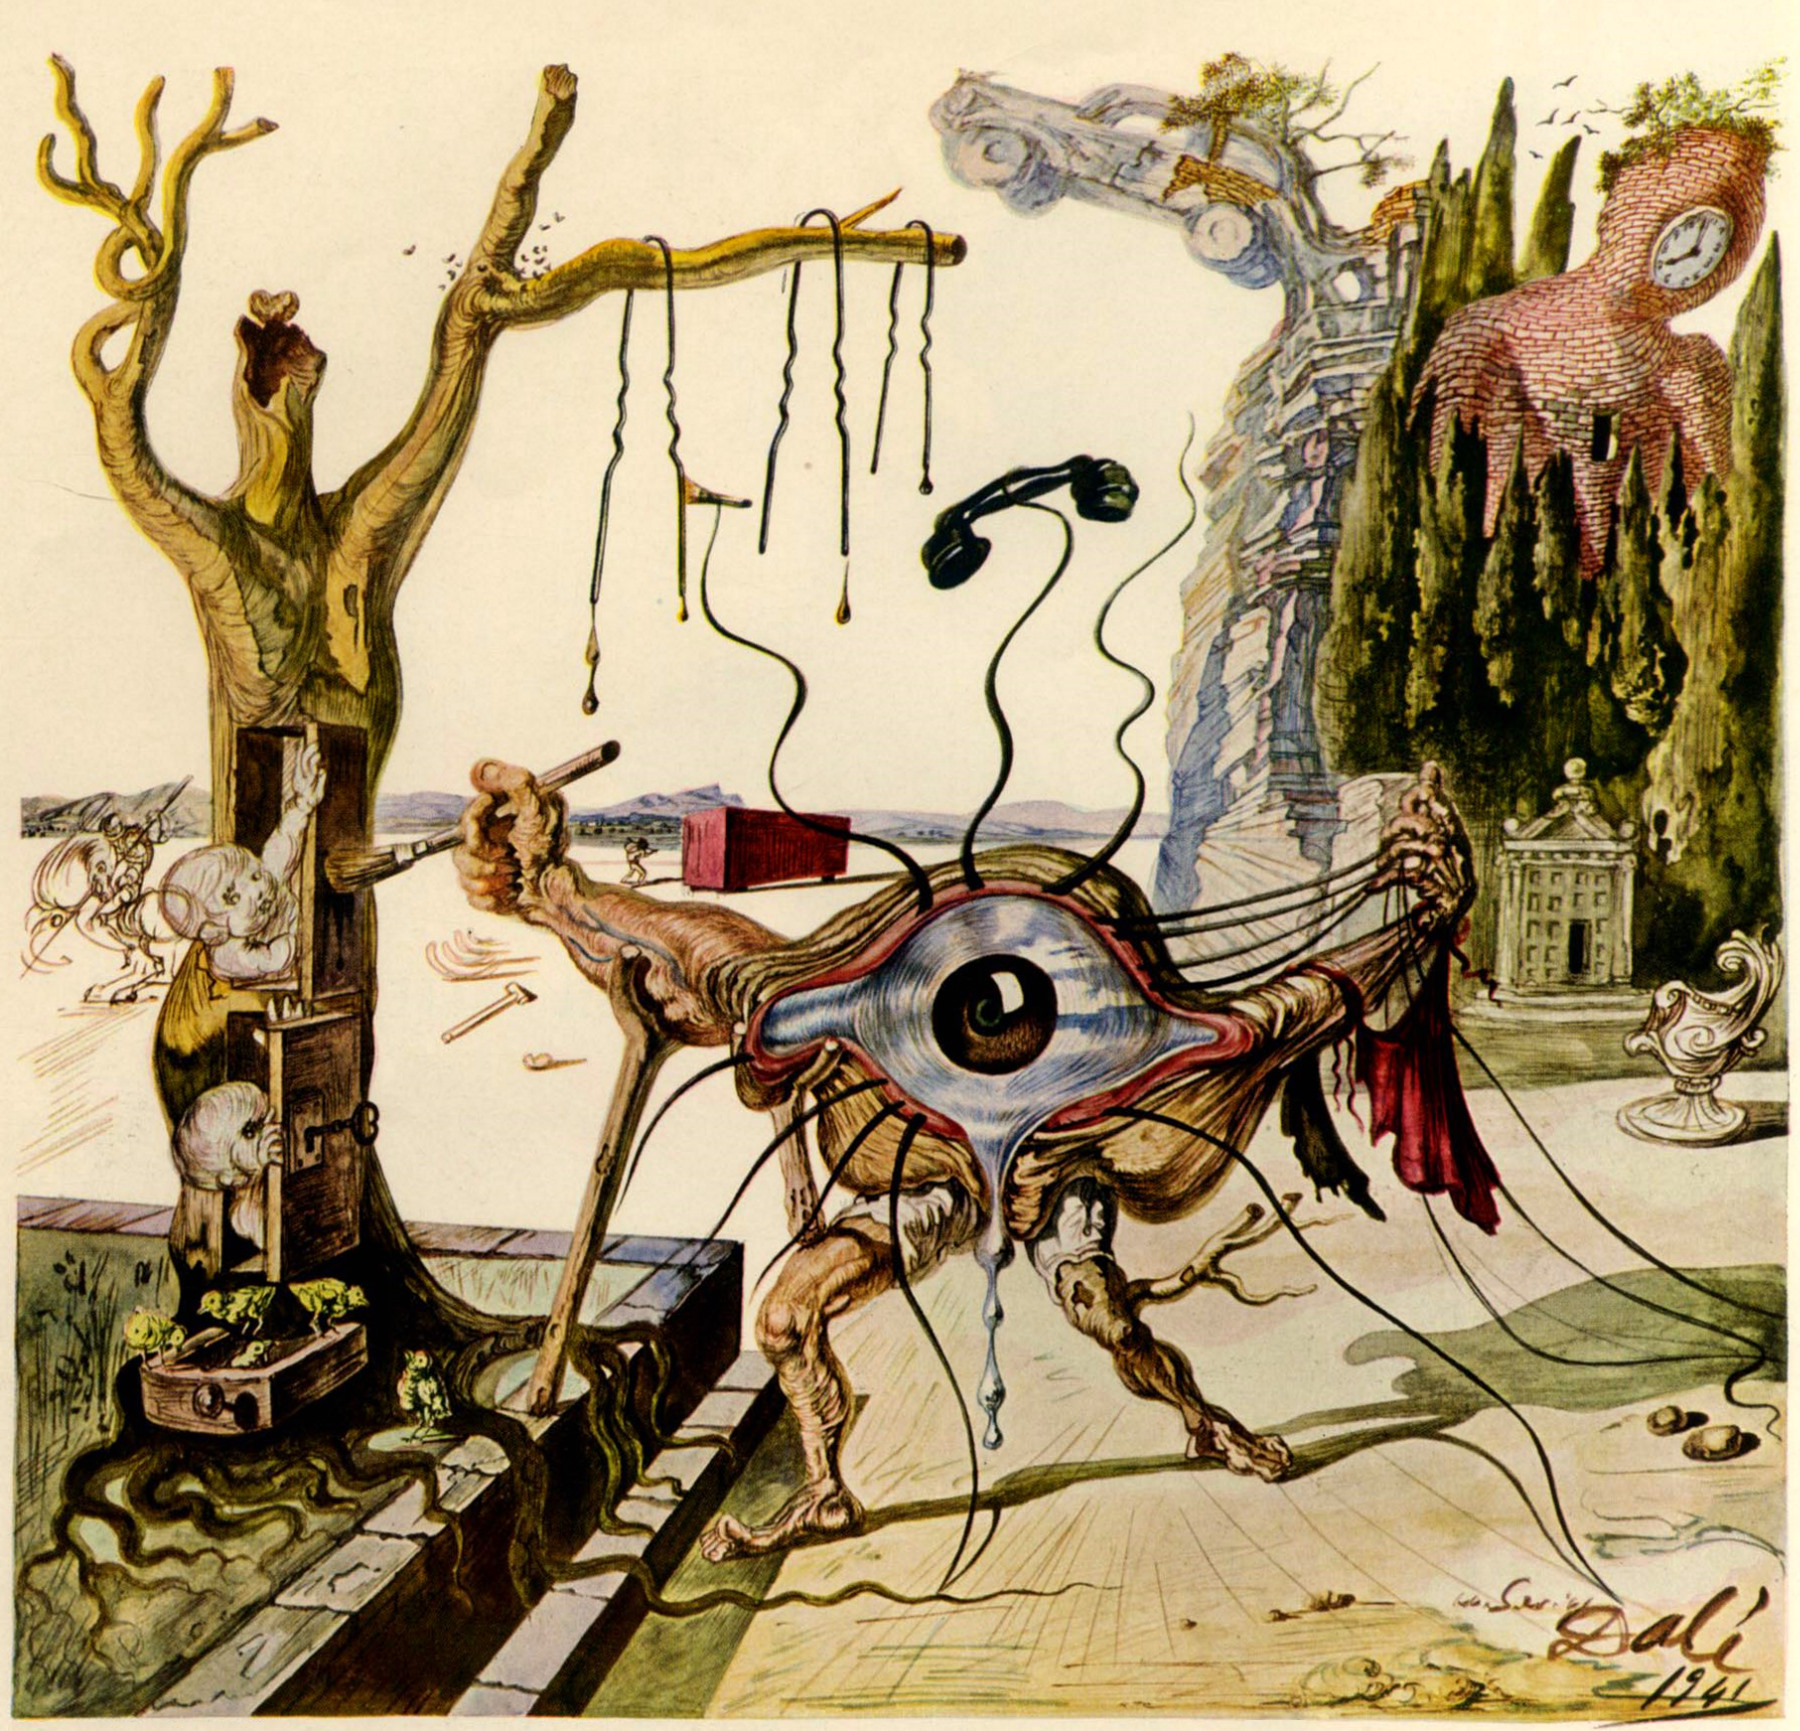 A surreal painting by Salvador Dali intended to represent the 